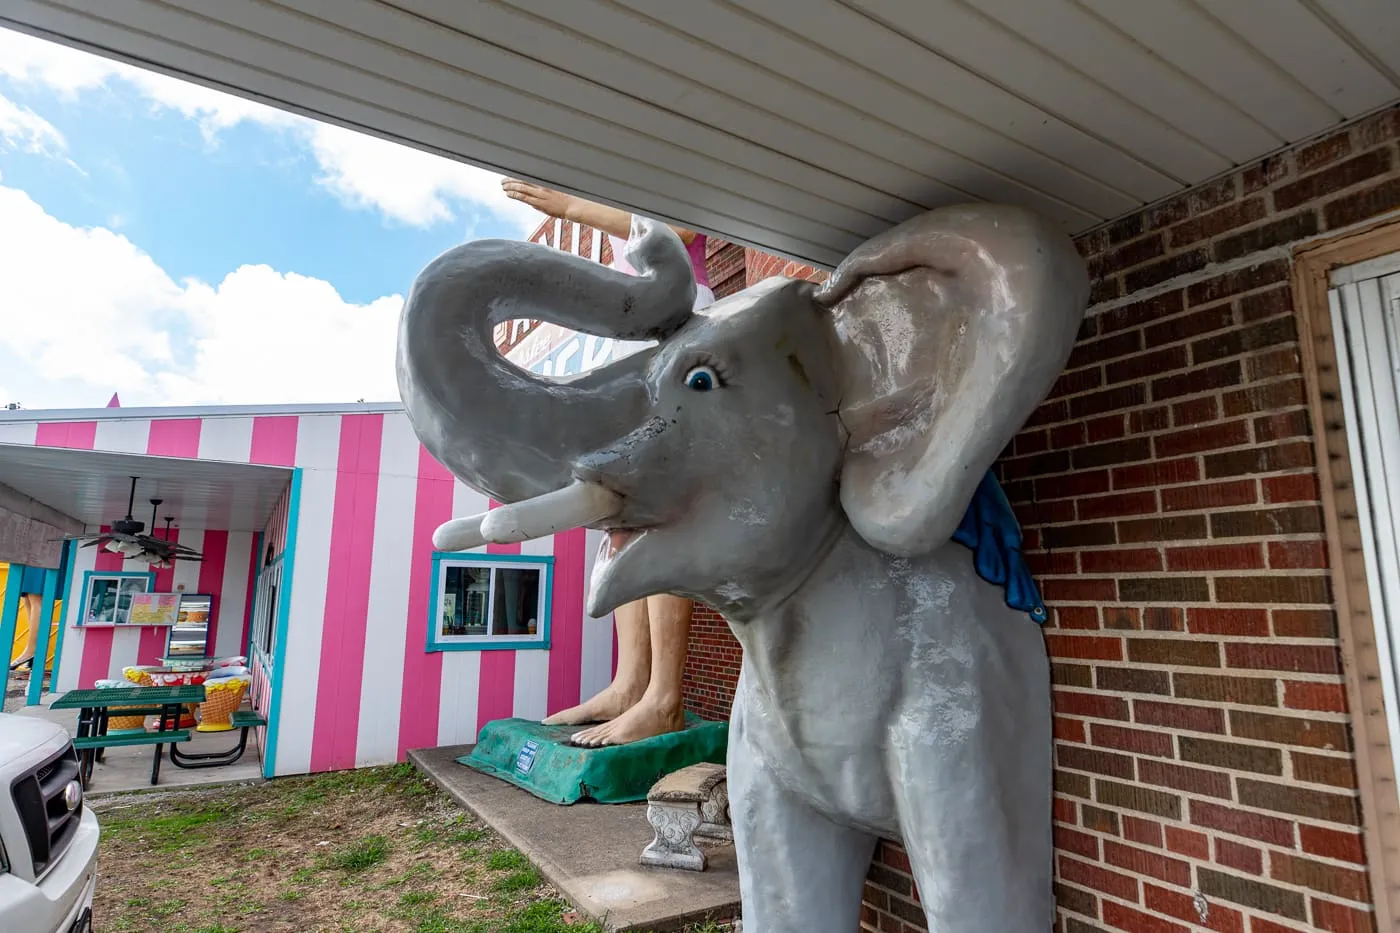 Fiberglass elephant at the Pink Elephant Antique Mall in Livingston, Illinois - Route 66 Roadside Attraction